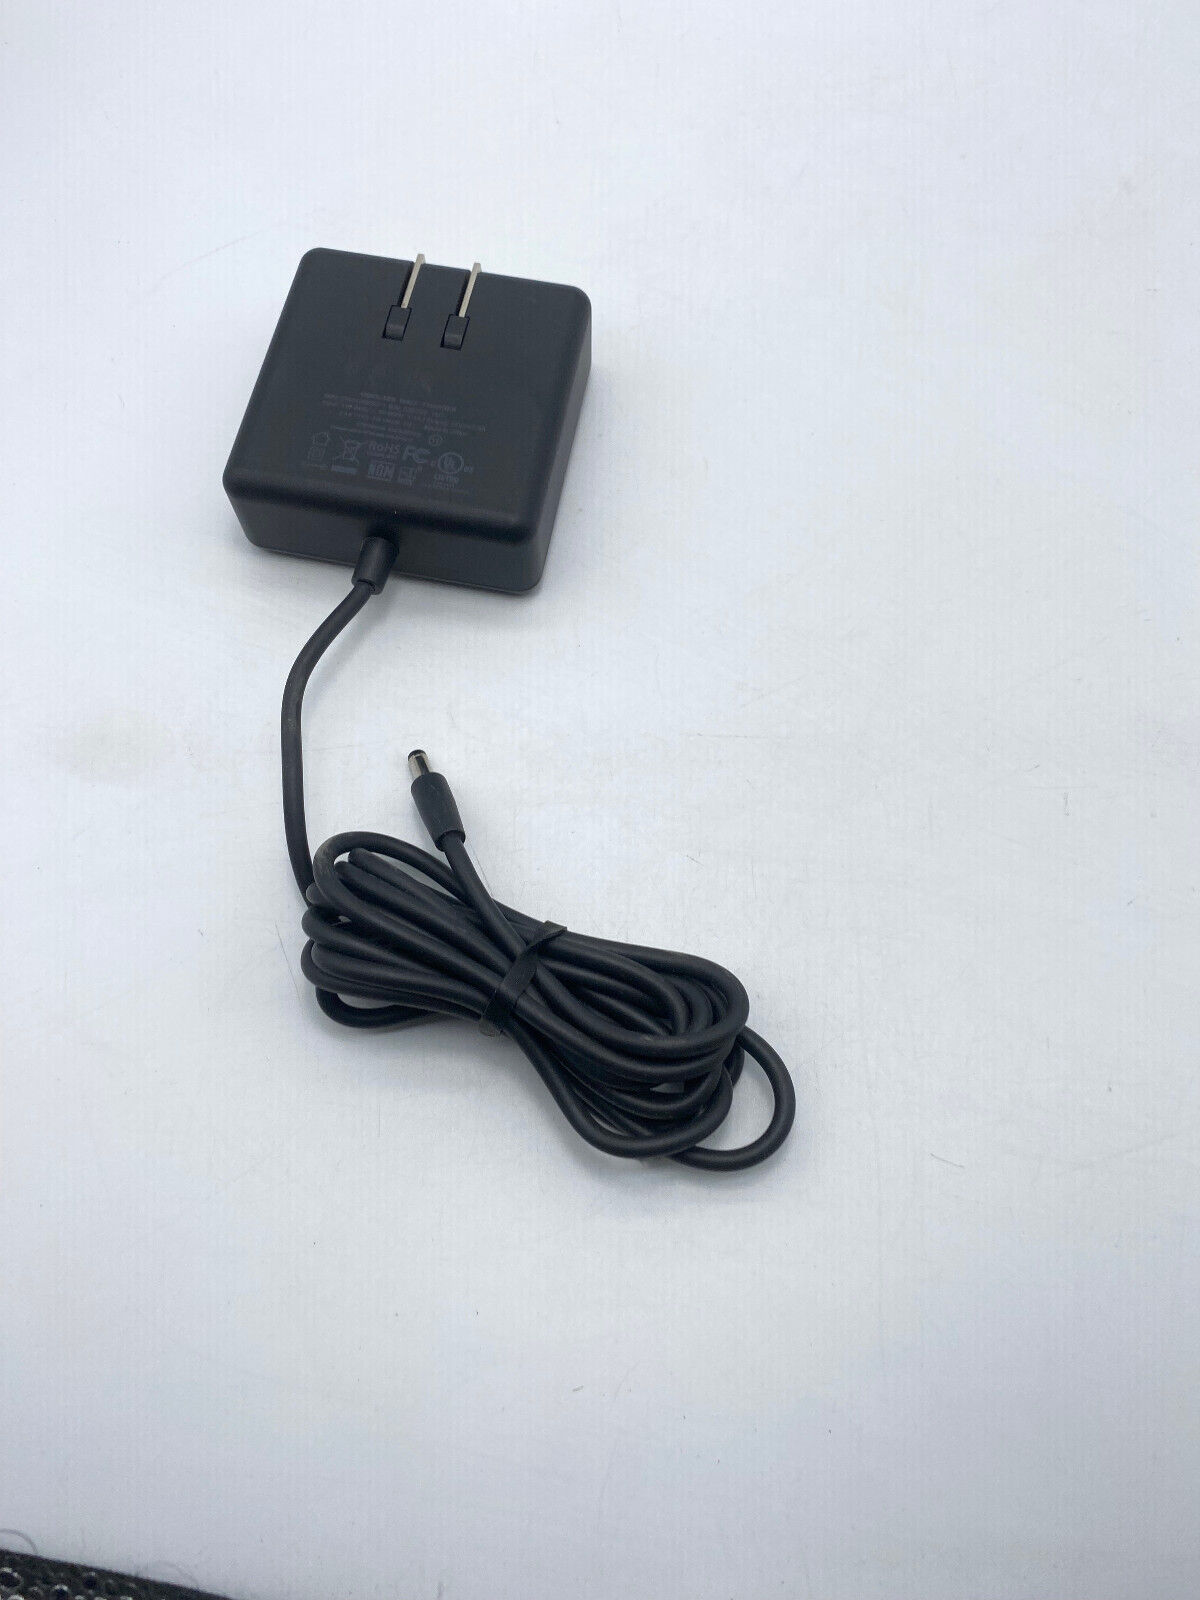 Ubiolabs CHG1088SGV Wall Charger AC Power Adapter 15V 3.5A Seller Notes new Brand Ubiolabs Type AC/DC Adapter MPN CHG10